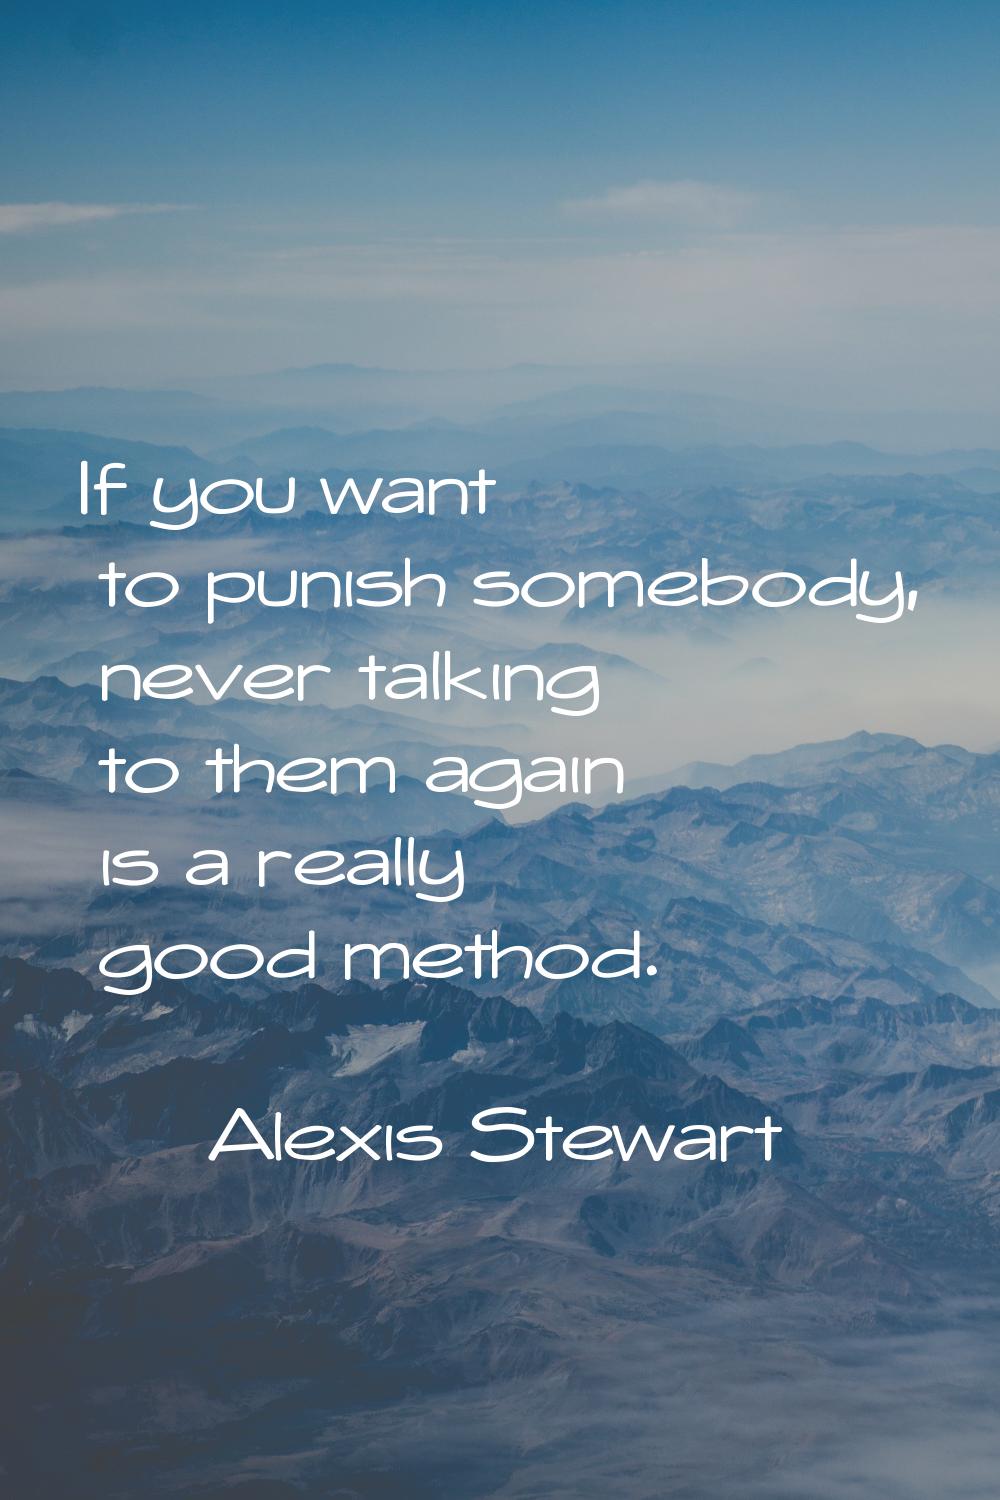 If you want to punish somebody, never talking to them again is a really good method.